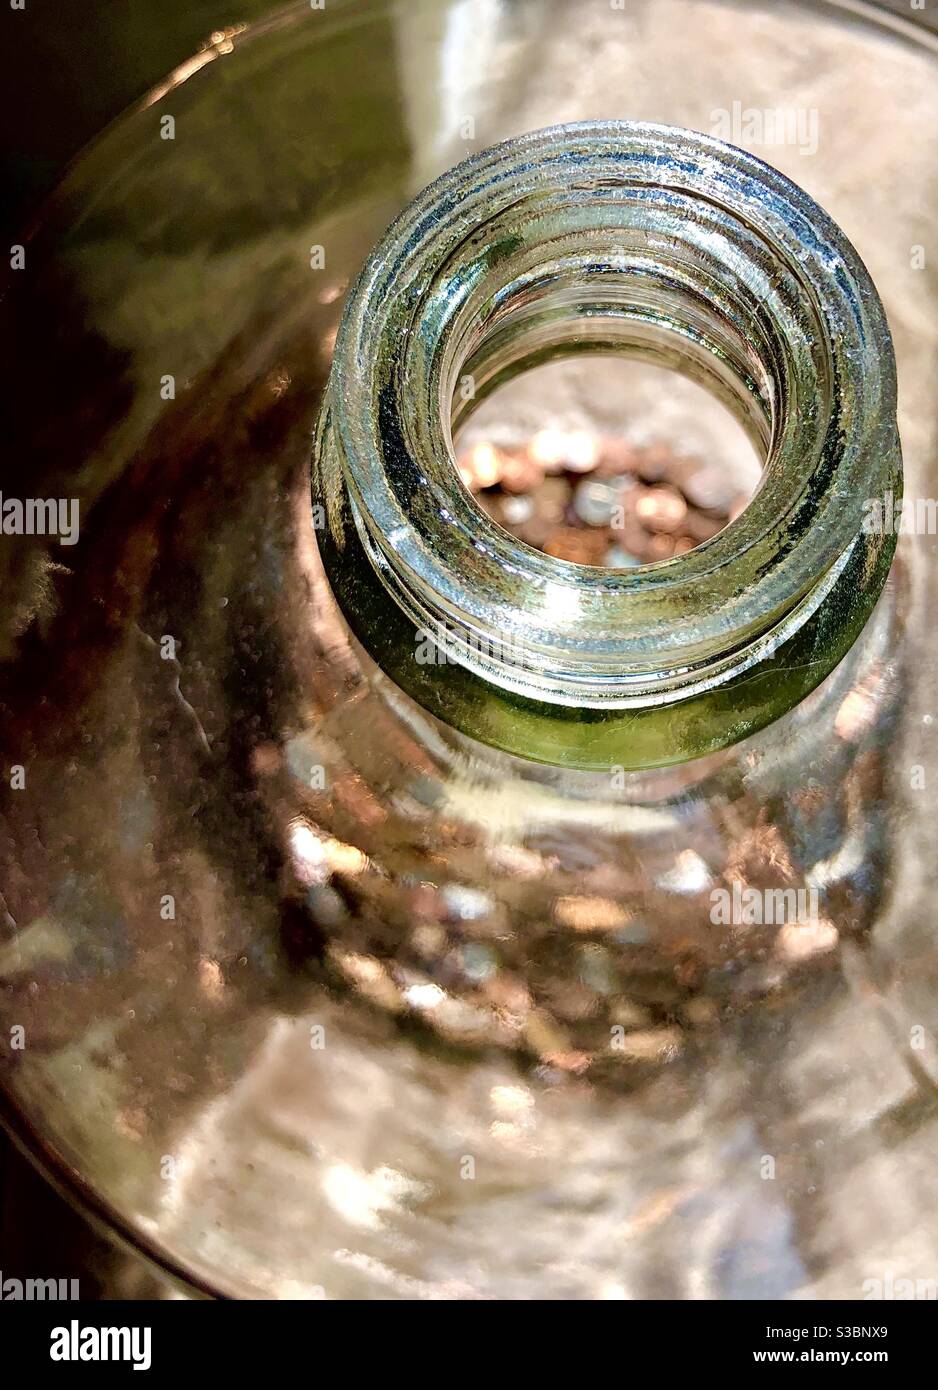 Spare change in glass jar Stock Photo